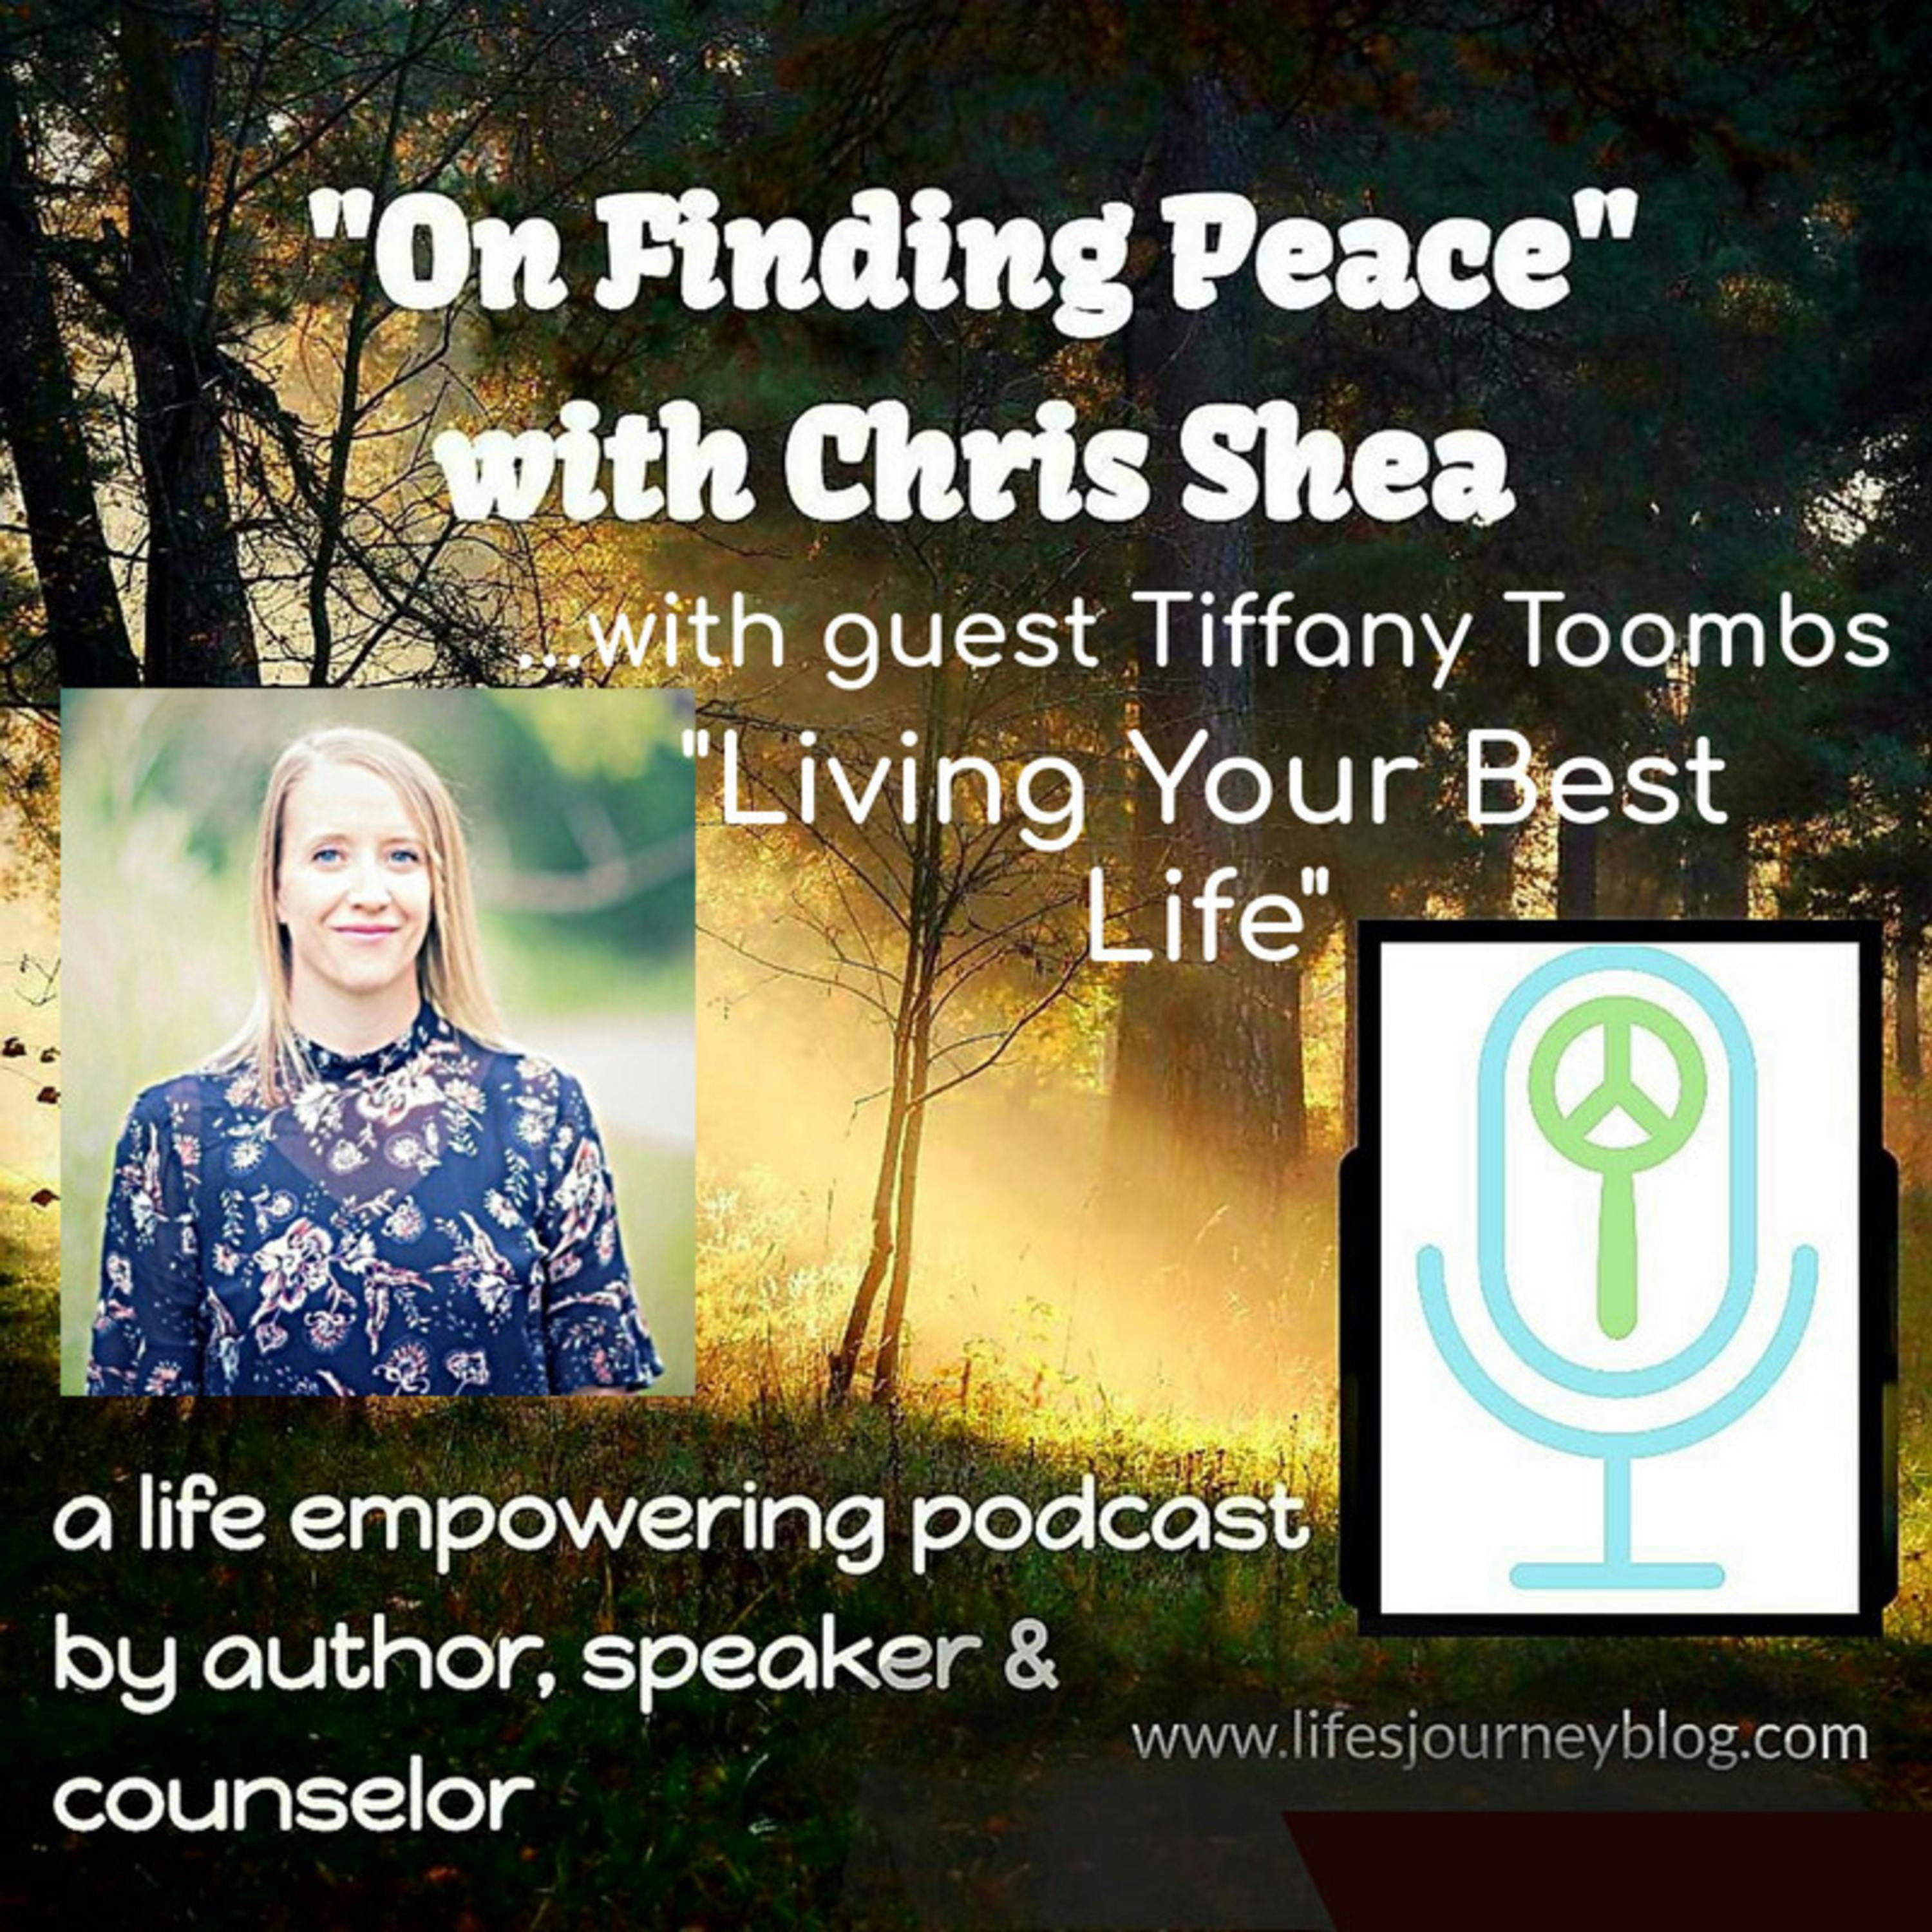 Living Your Best Life: an interview with Tiffany Toombs